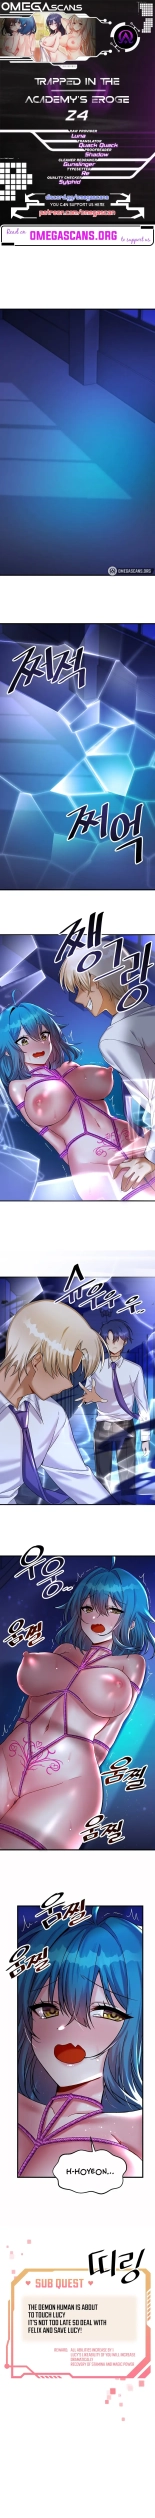 Trapped in the Academy's Eroge : página 202